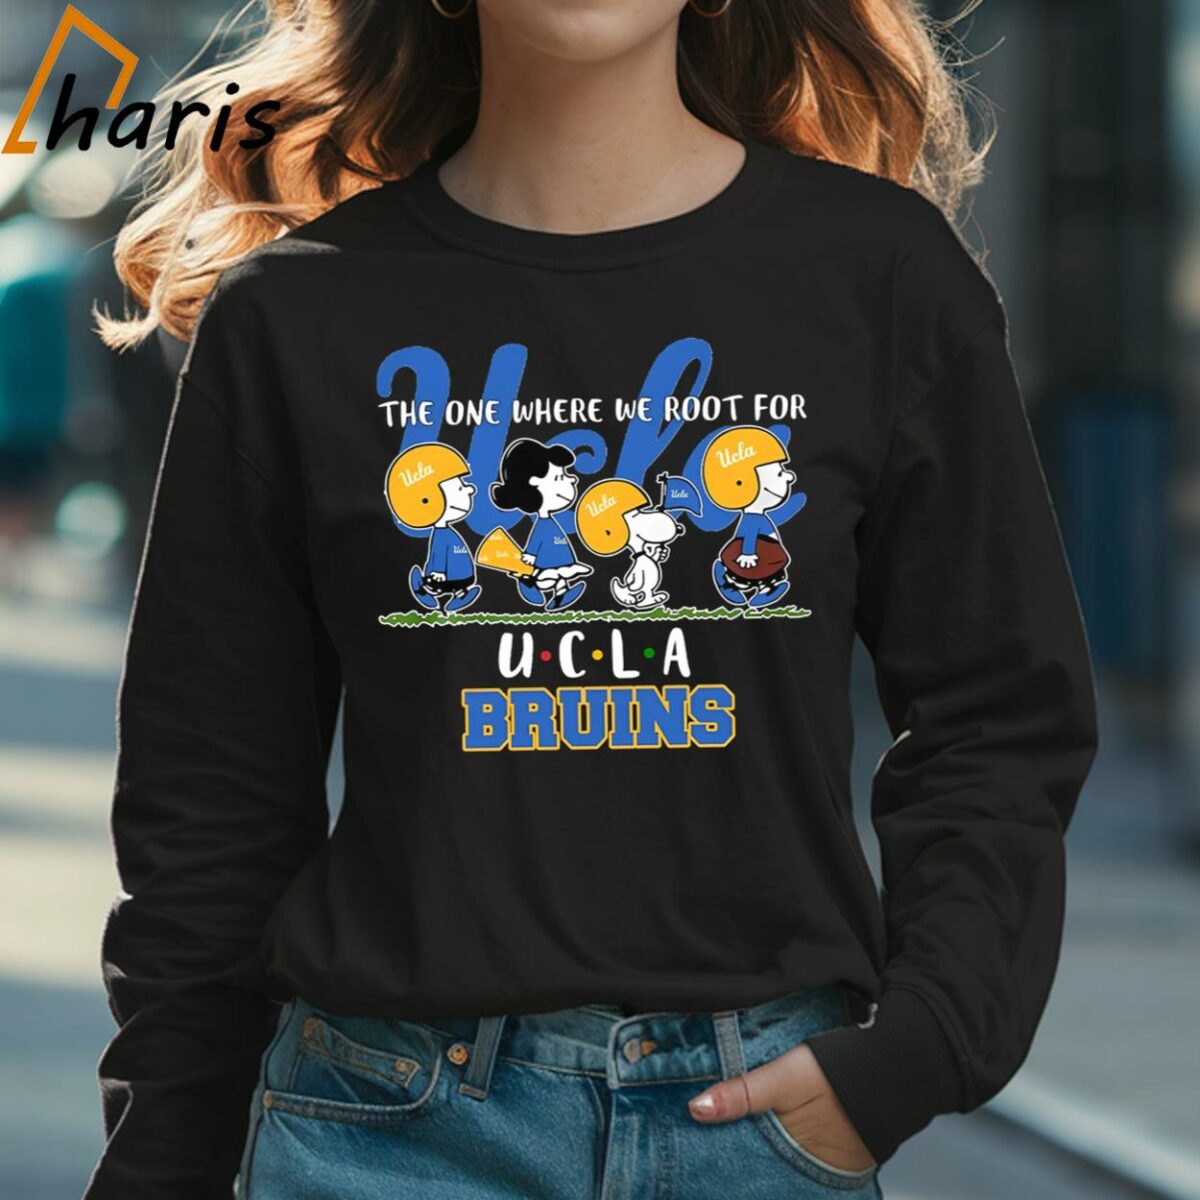 Snoopy and Woodstock Peanuts The One Where We Root For UCLA Bruins T shirt 3 Long sleeve shirt